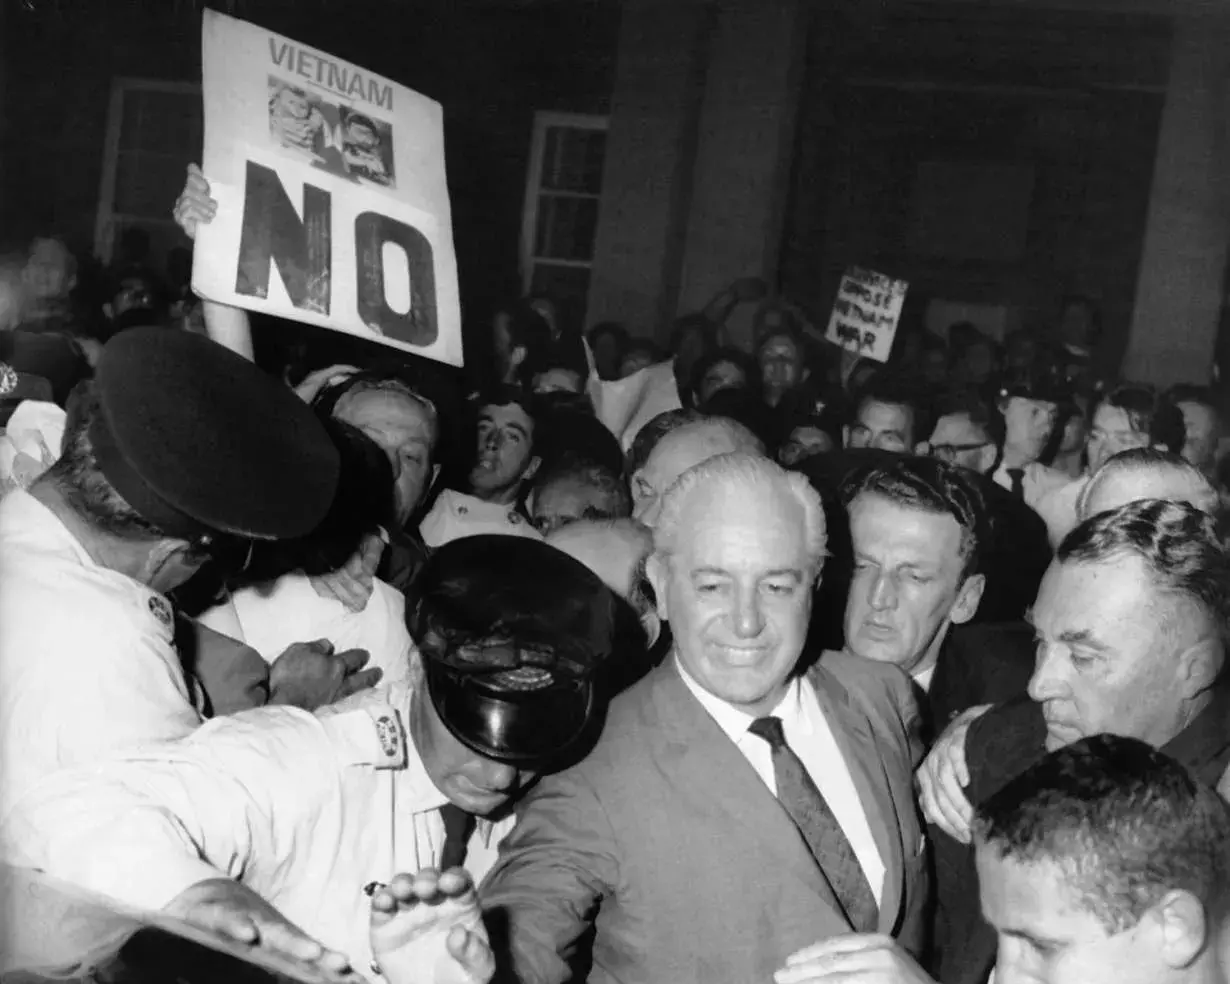 Harold Holt standing in the middle of a crowd of demonstrators.  